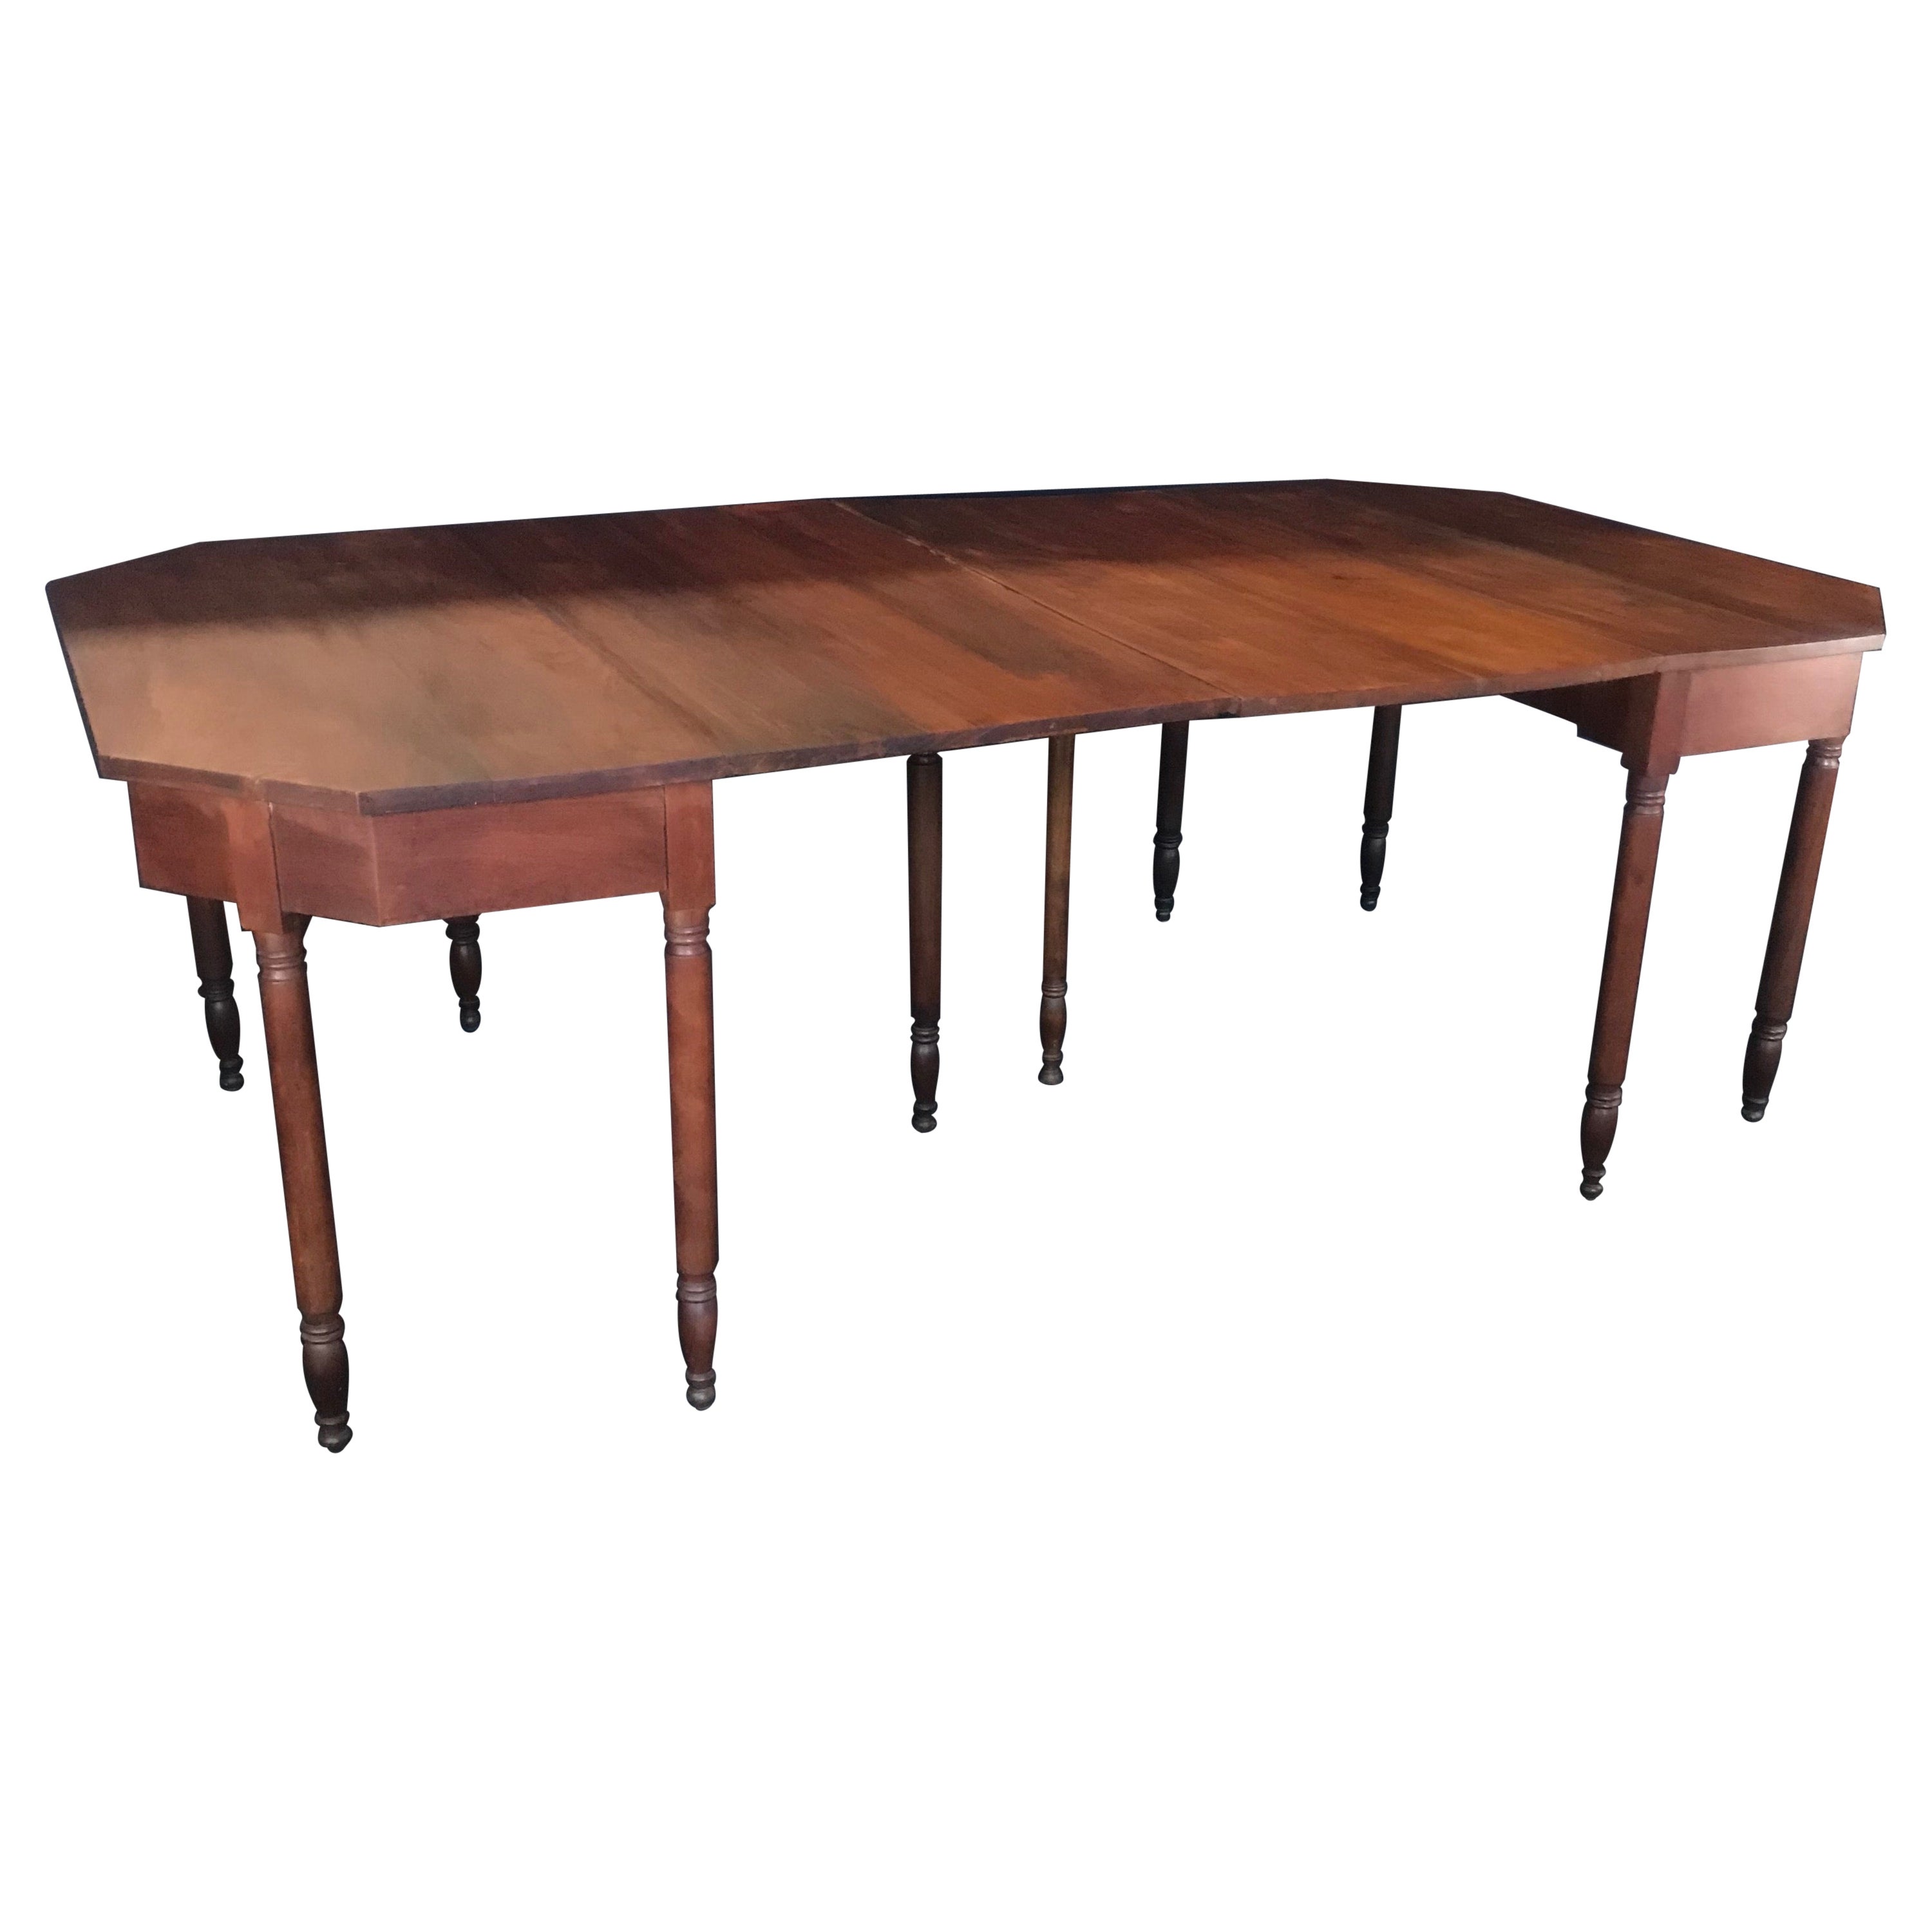 Versatile Early American Federal Harvest Dining Table or Space Saving Demilunes For Sale